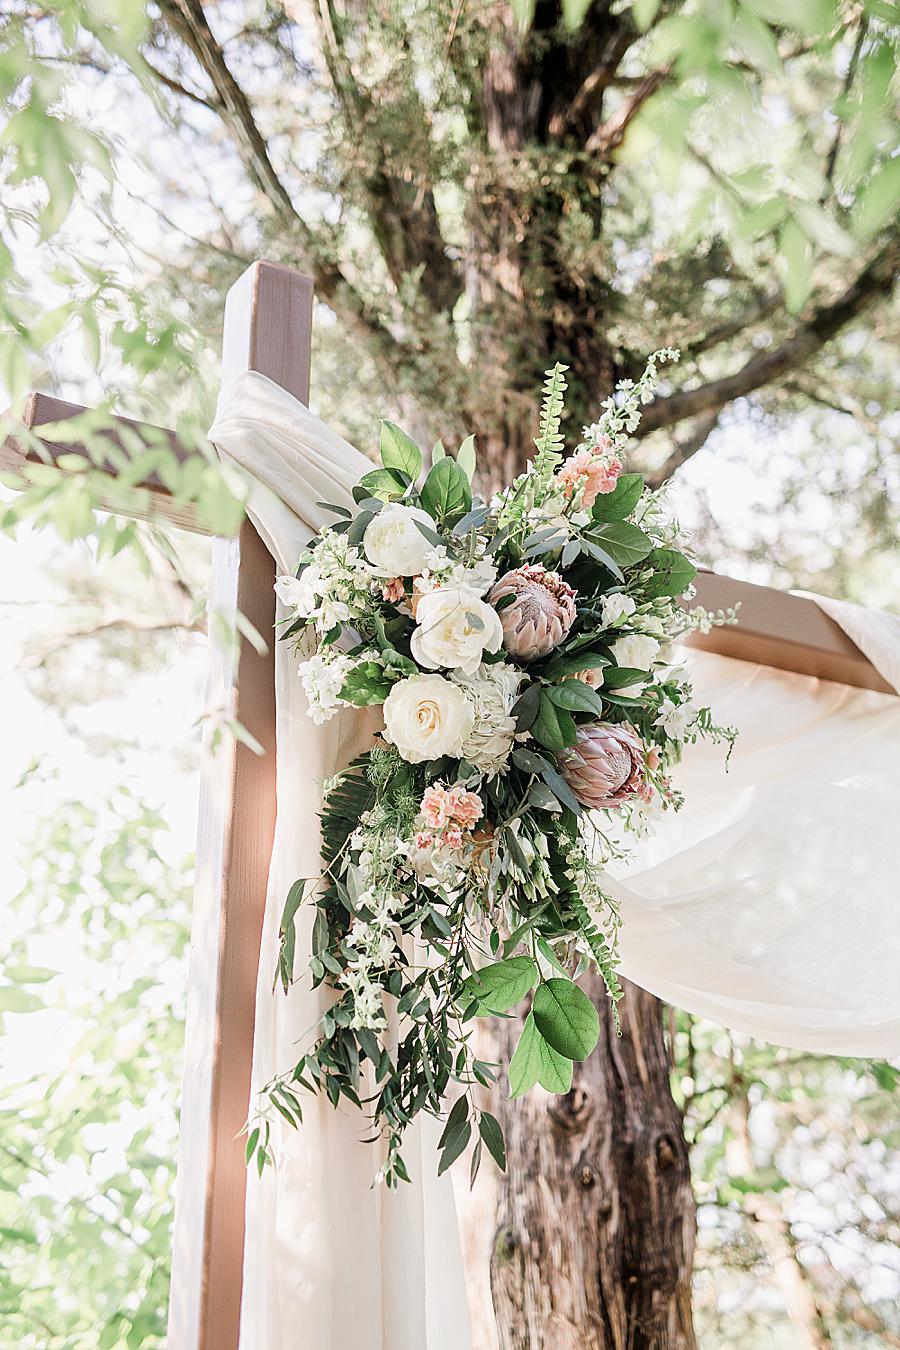 Ceremony flowers at this pavilion wedding by Knoxville Wedding Photographer, Amanda May Photos.